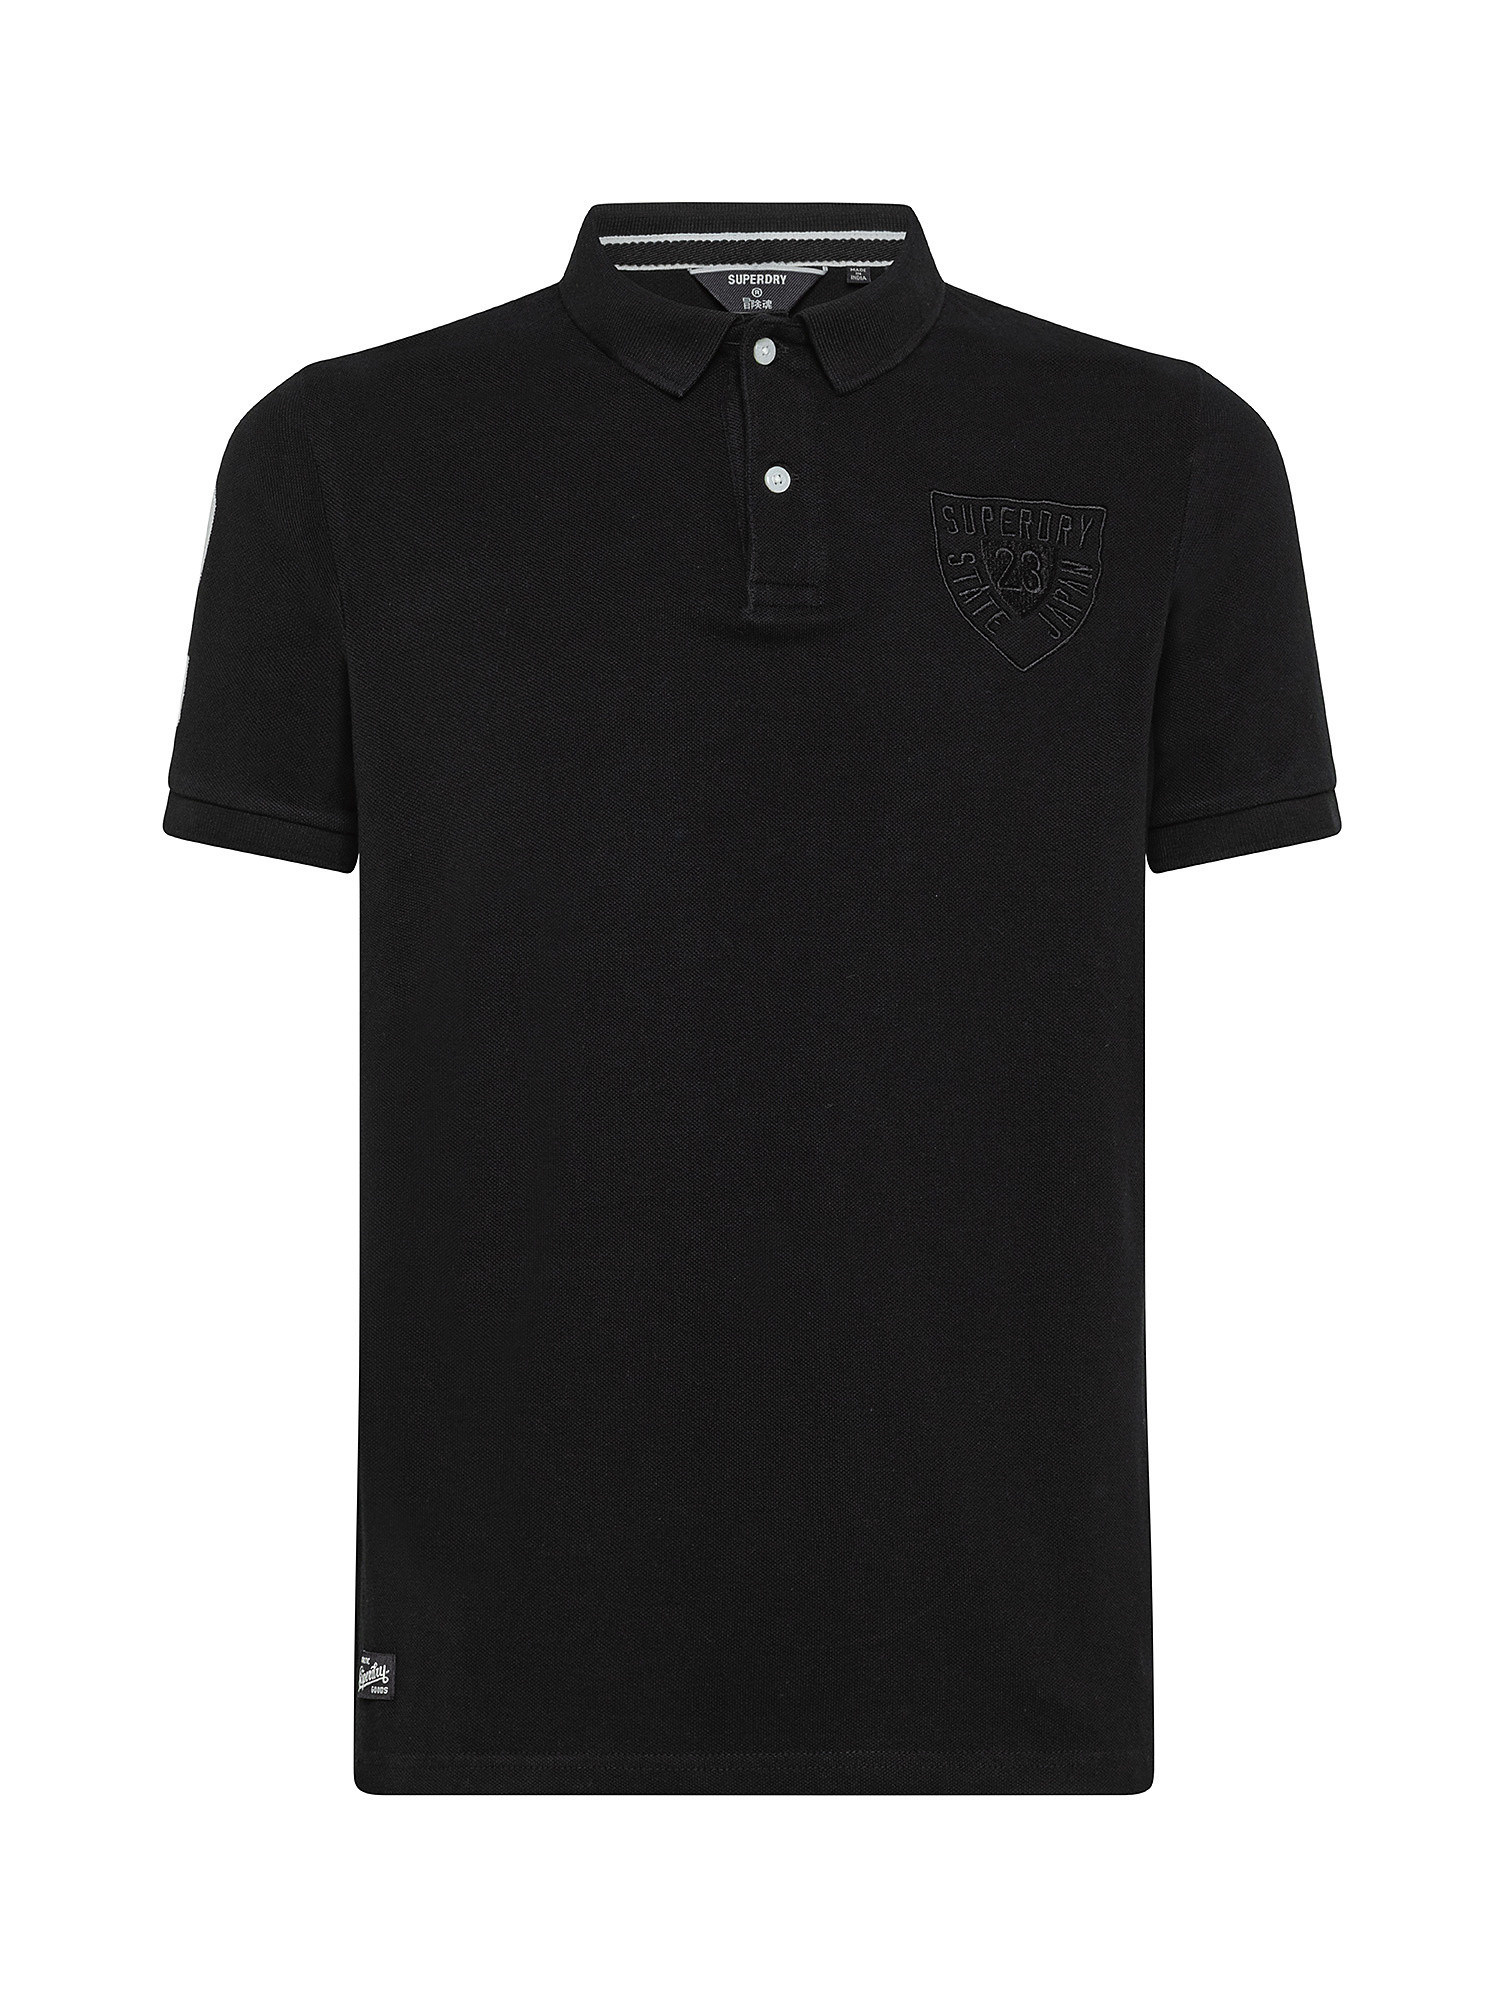 Polo shirt with embroidered graphics, Black, large image number 0